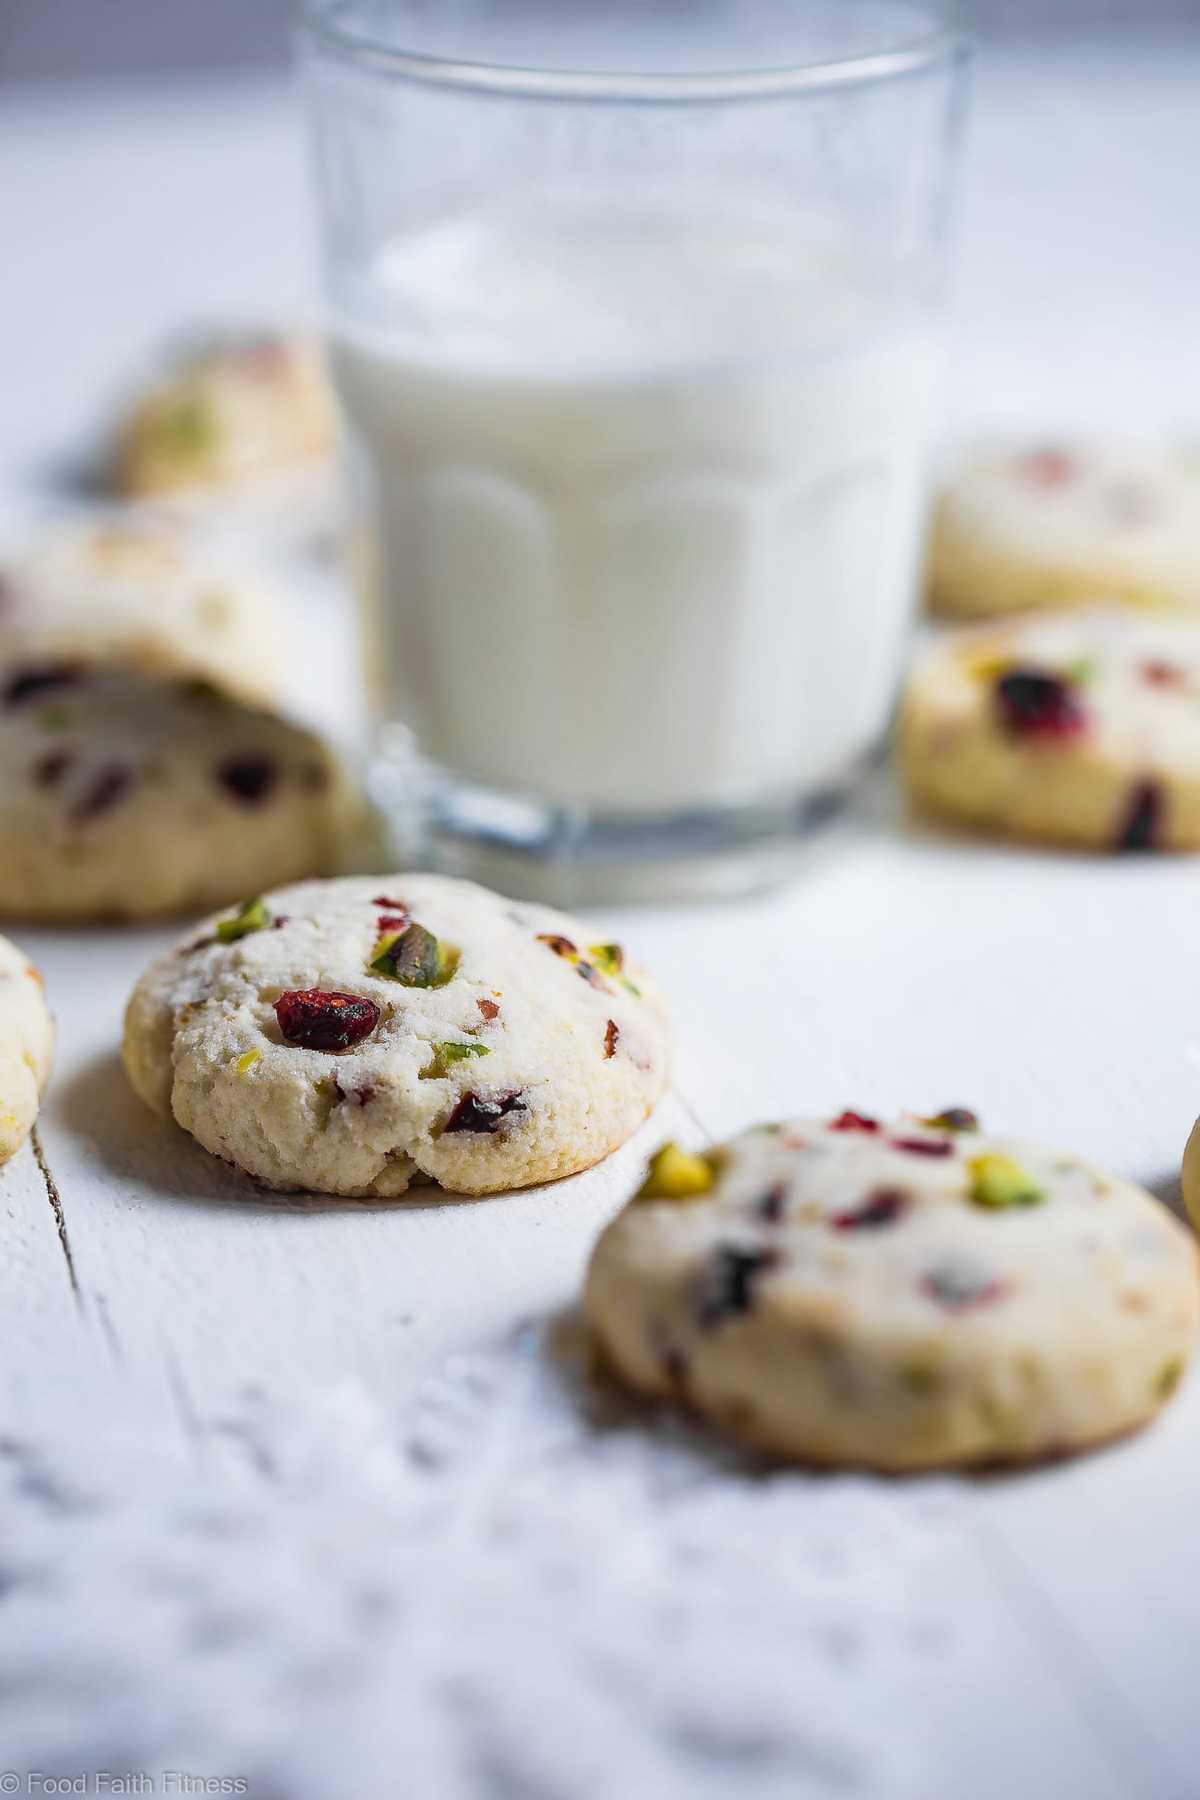 This quick and easy, gluten-free sugar-free Chewy Sugar Cookies Recipe has cranberries and pistachios! They’re a healthier Christmas treat for only 95 calories!